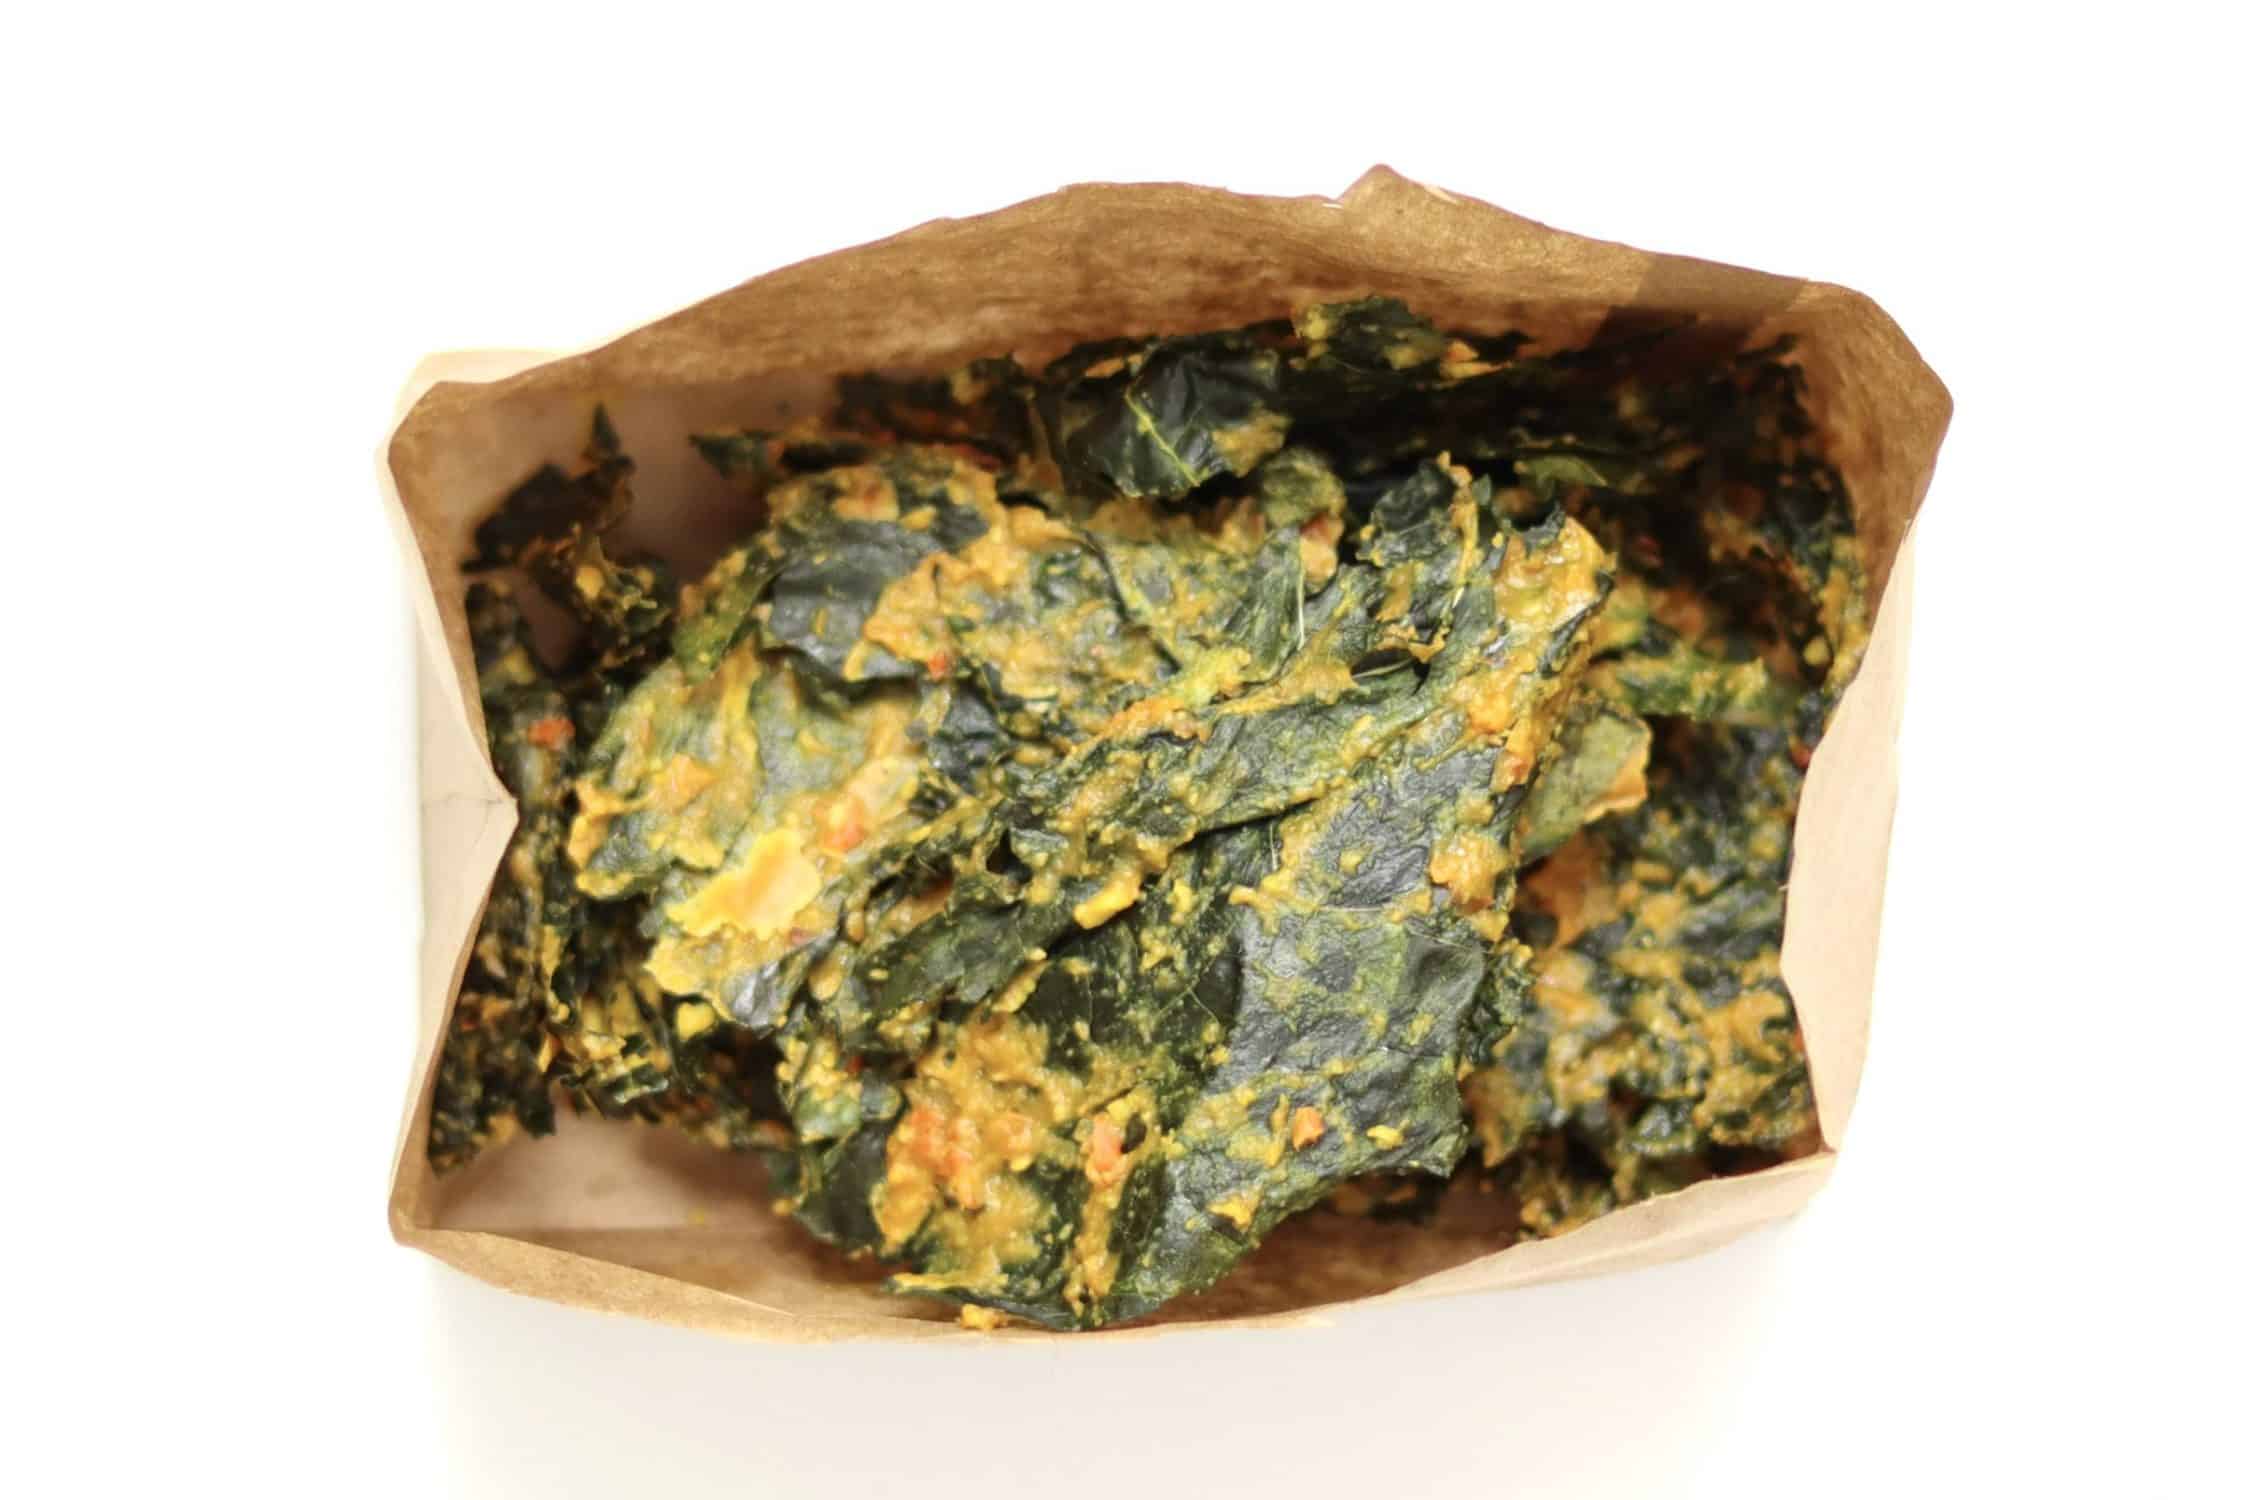 How To Store Homemade Kale Chips